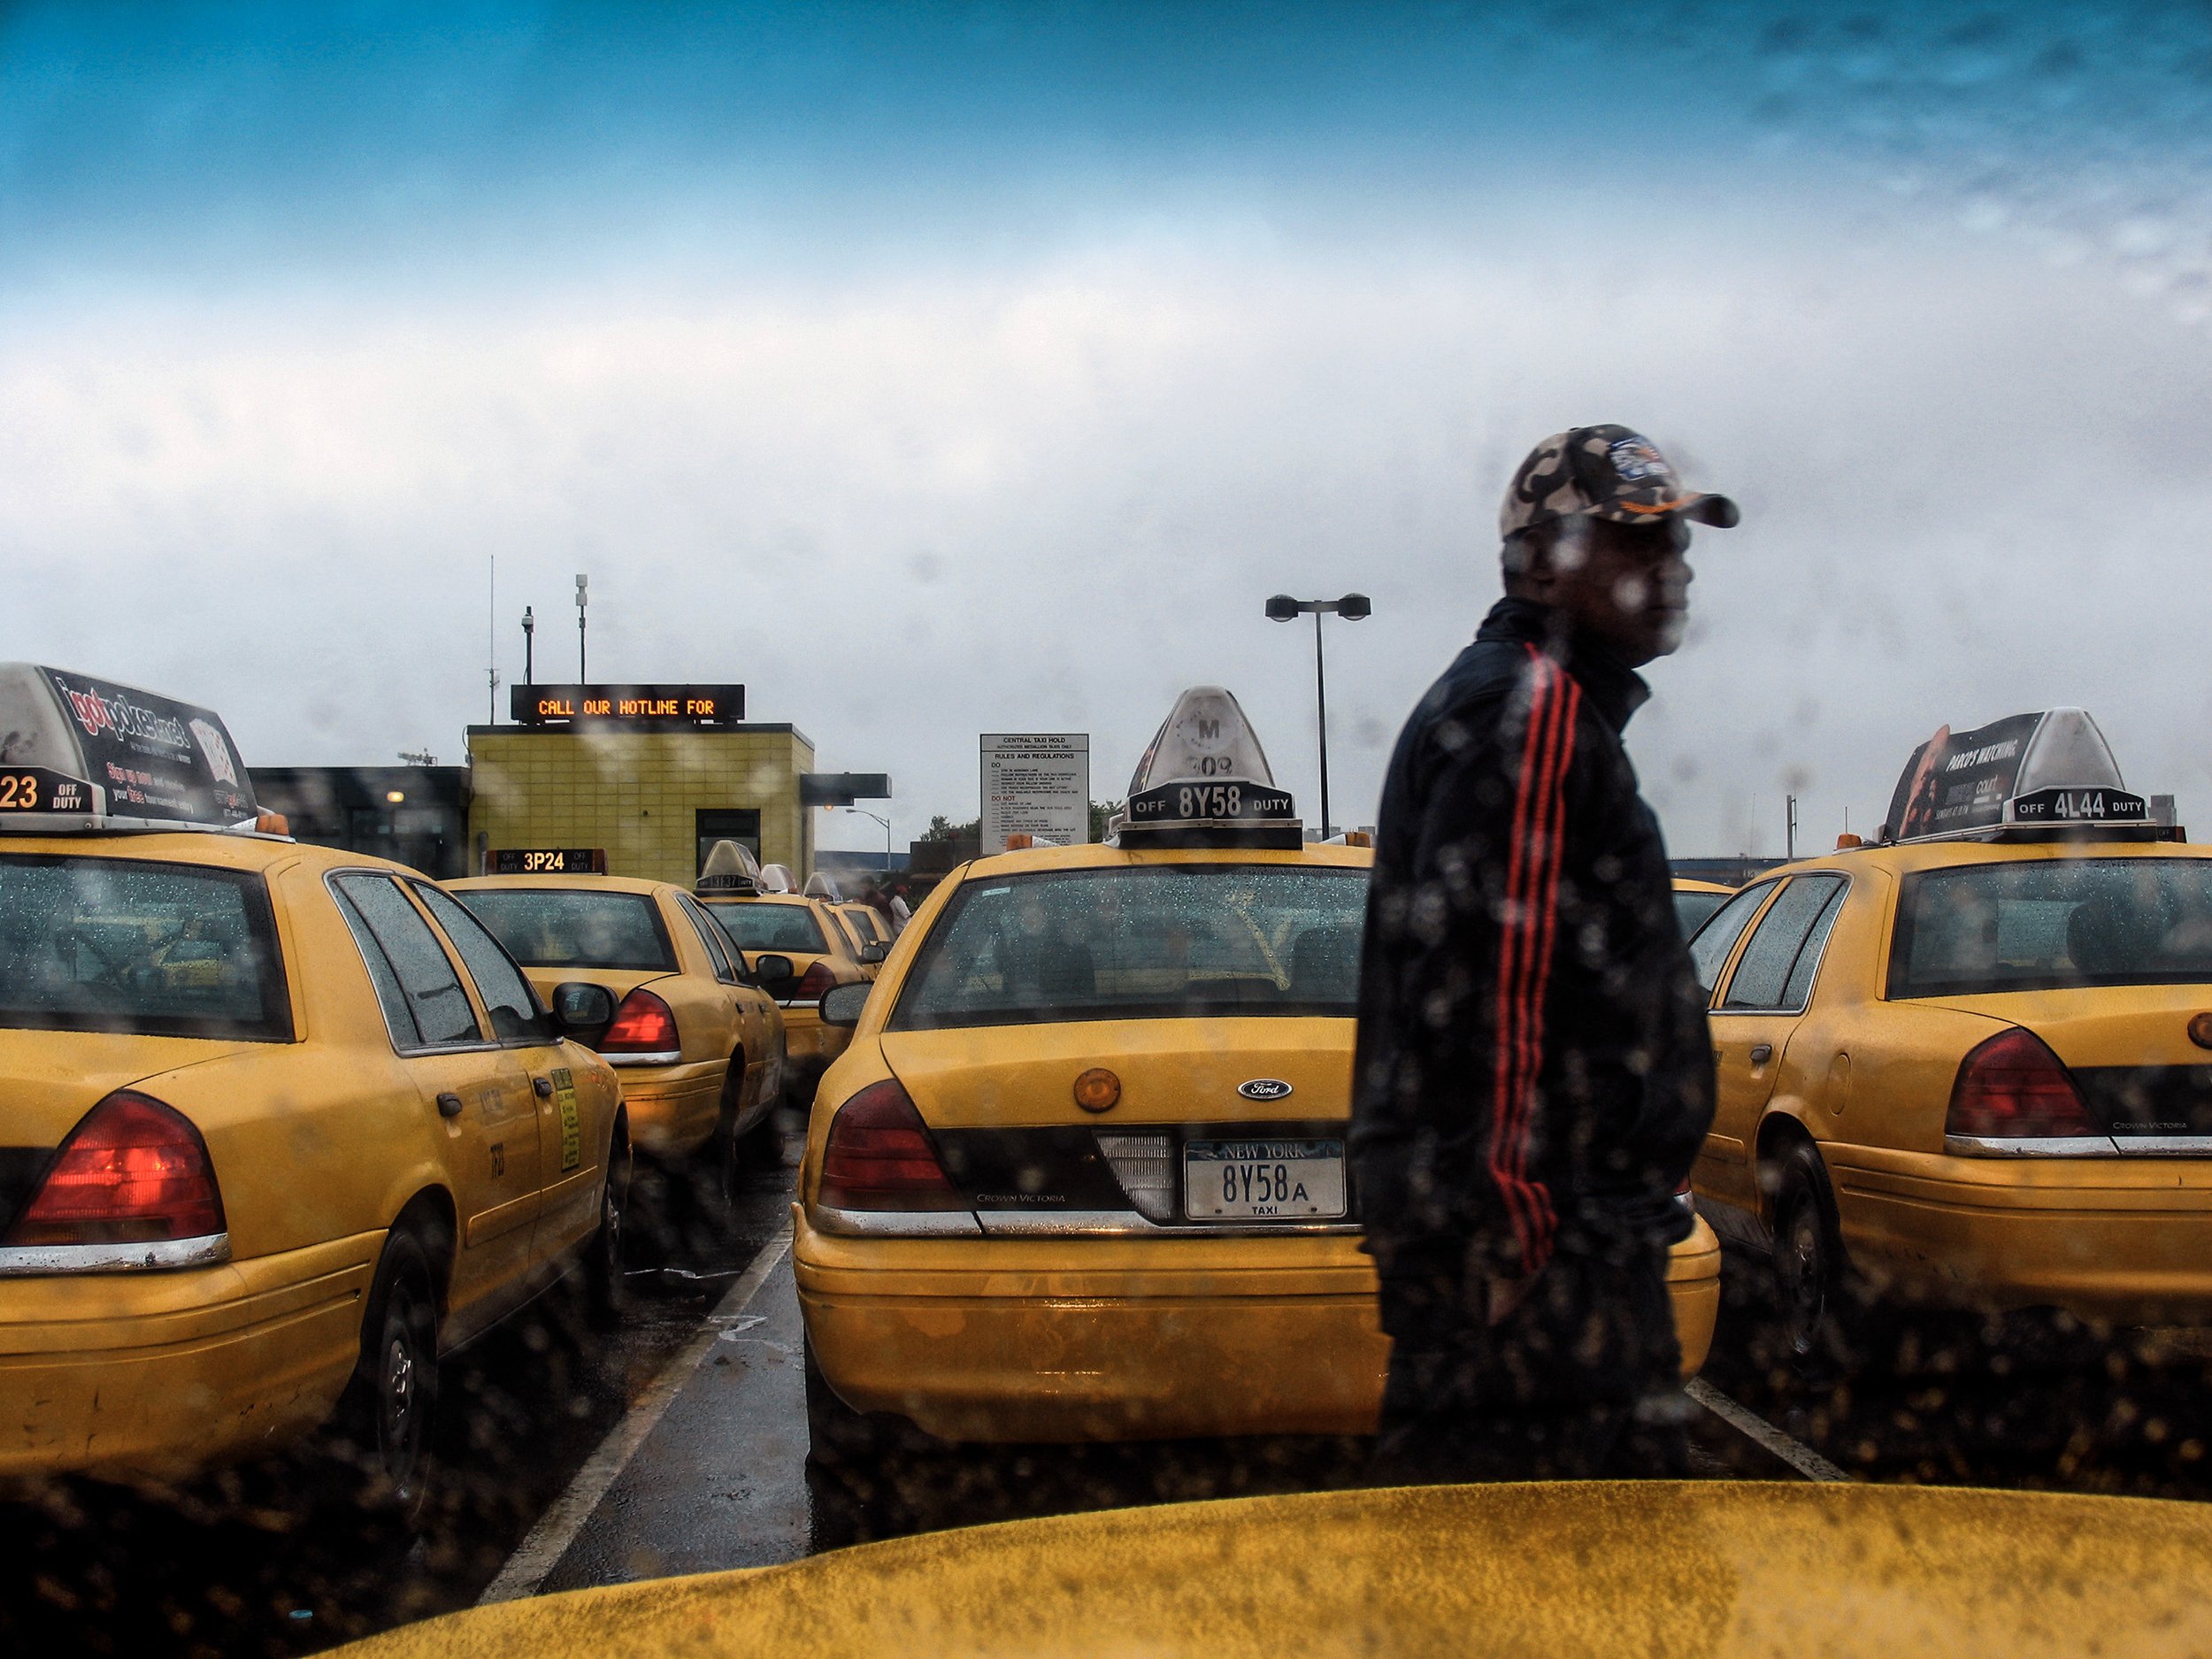 The Driver, Cabs at JFK, 2006